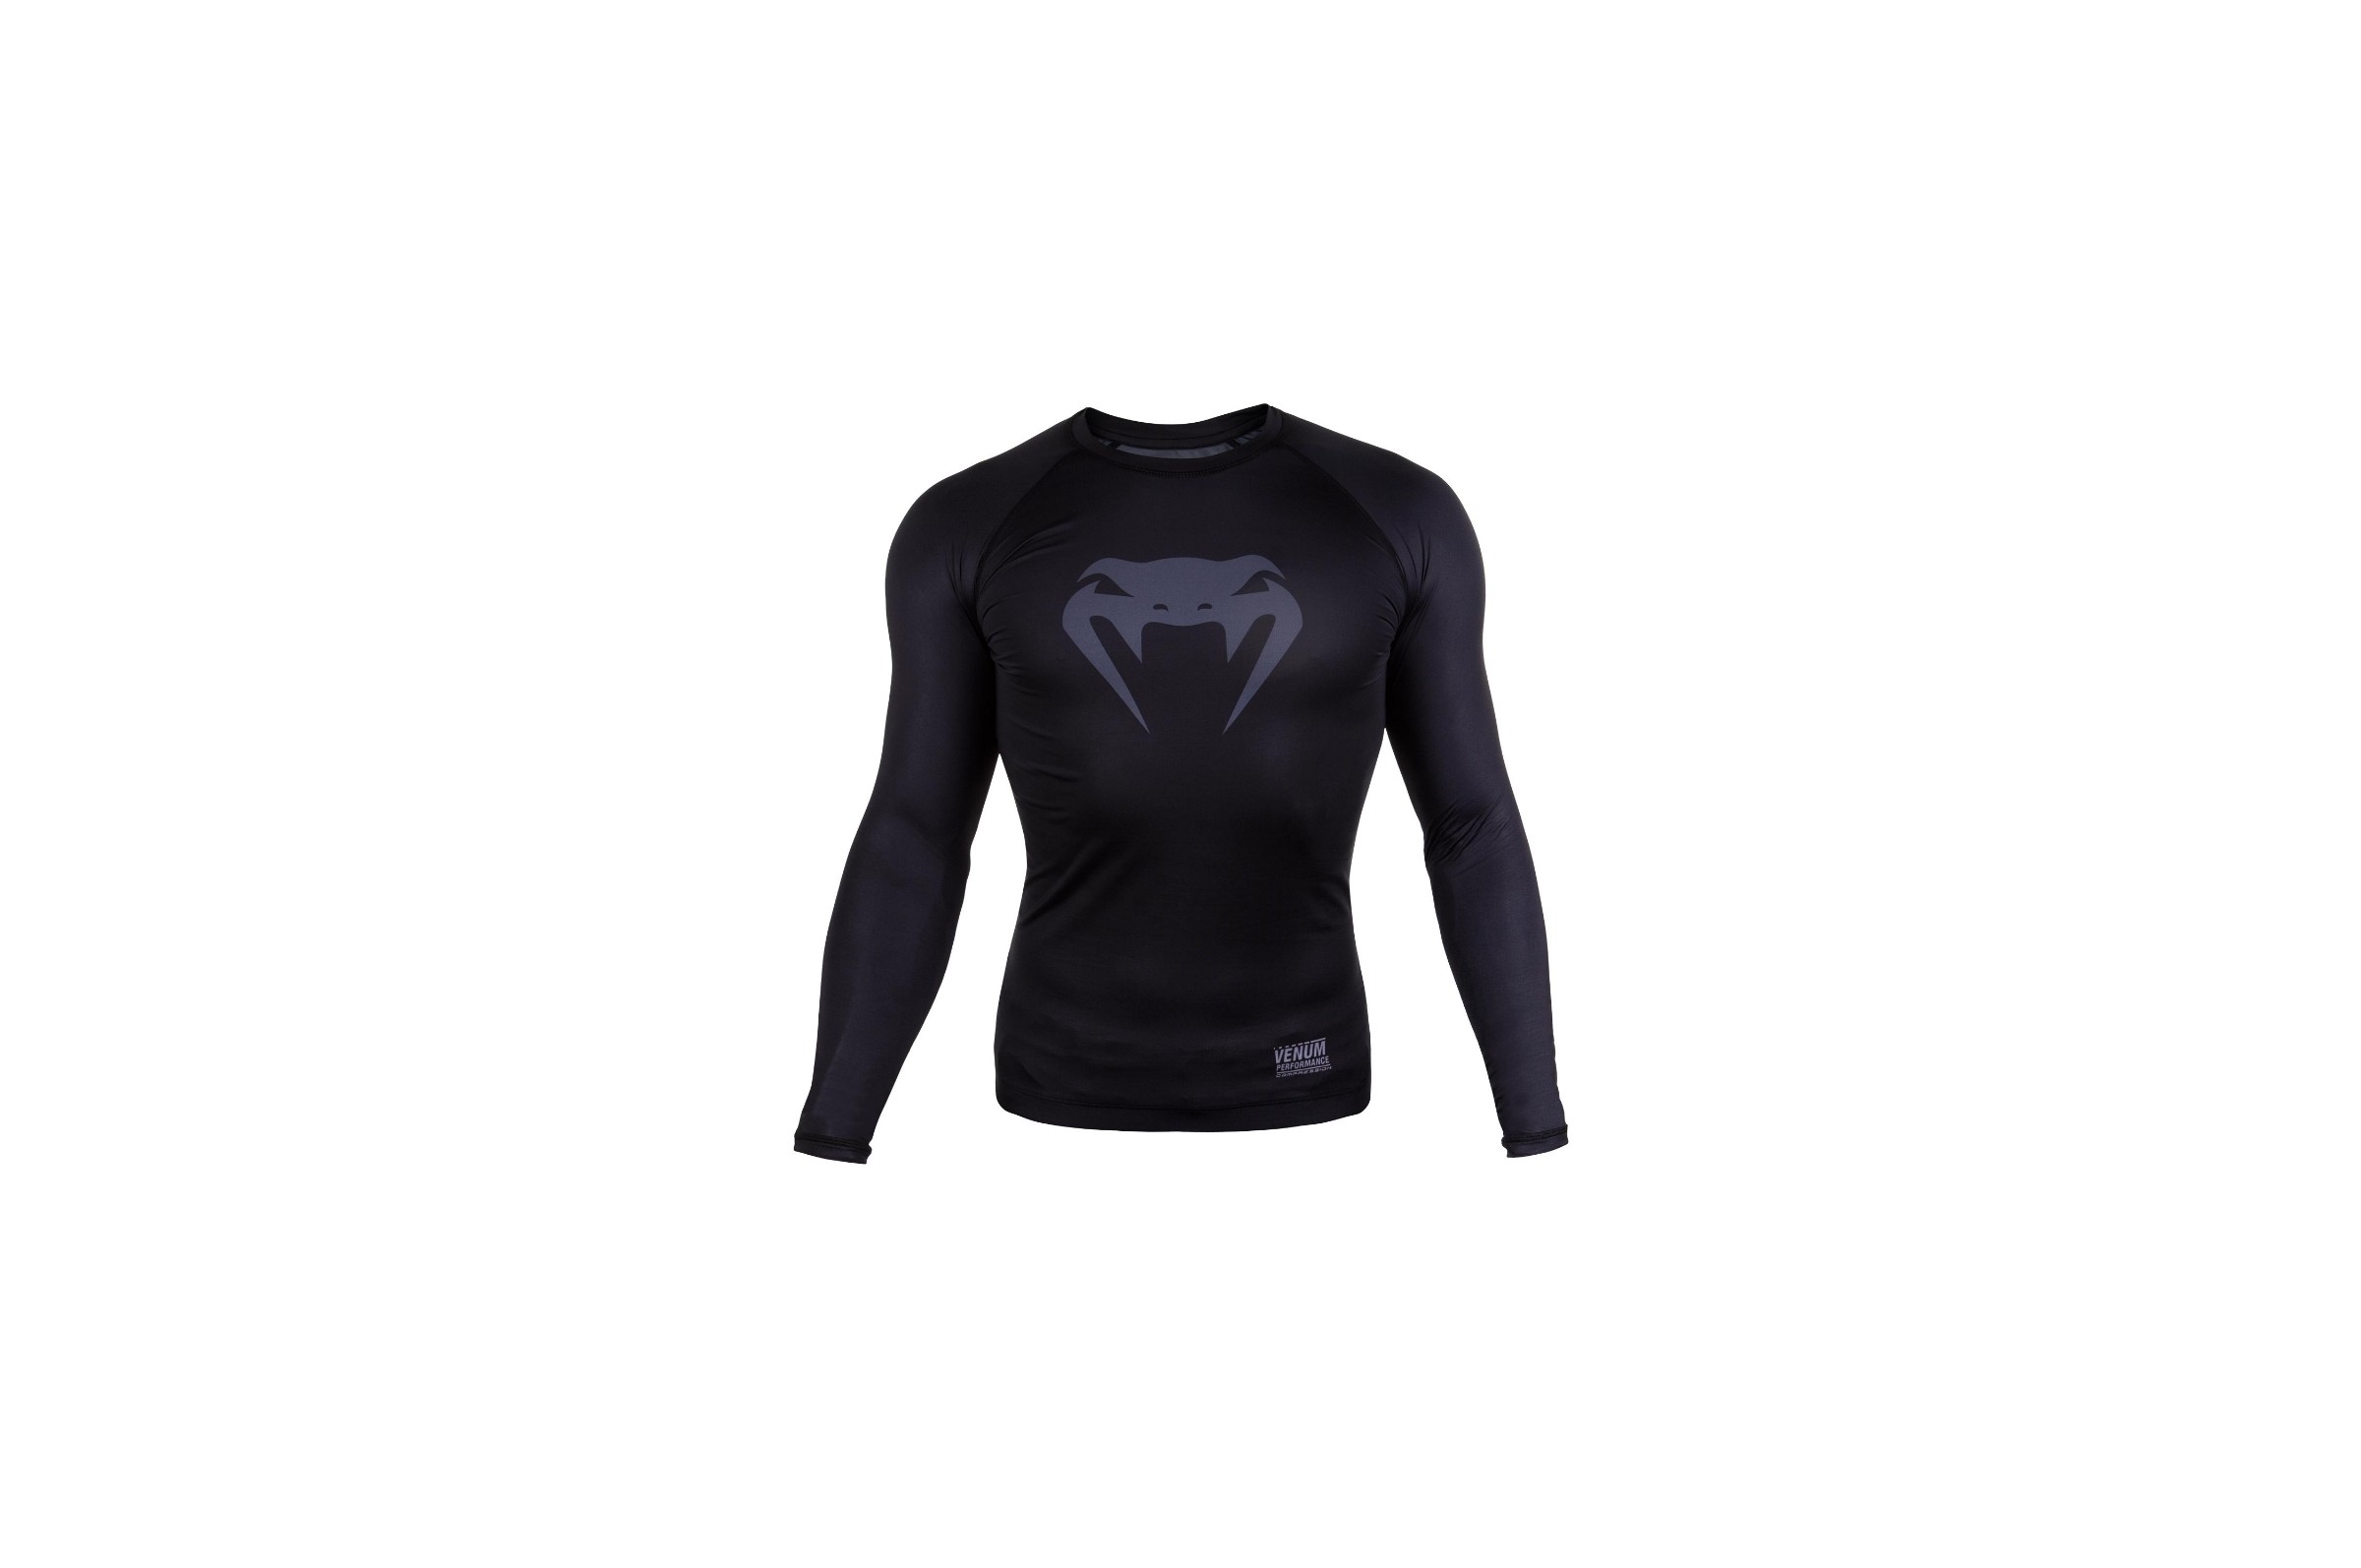 Long Sleeves Venum Contender 3.0 Compression T-shirt